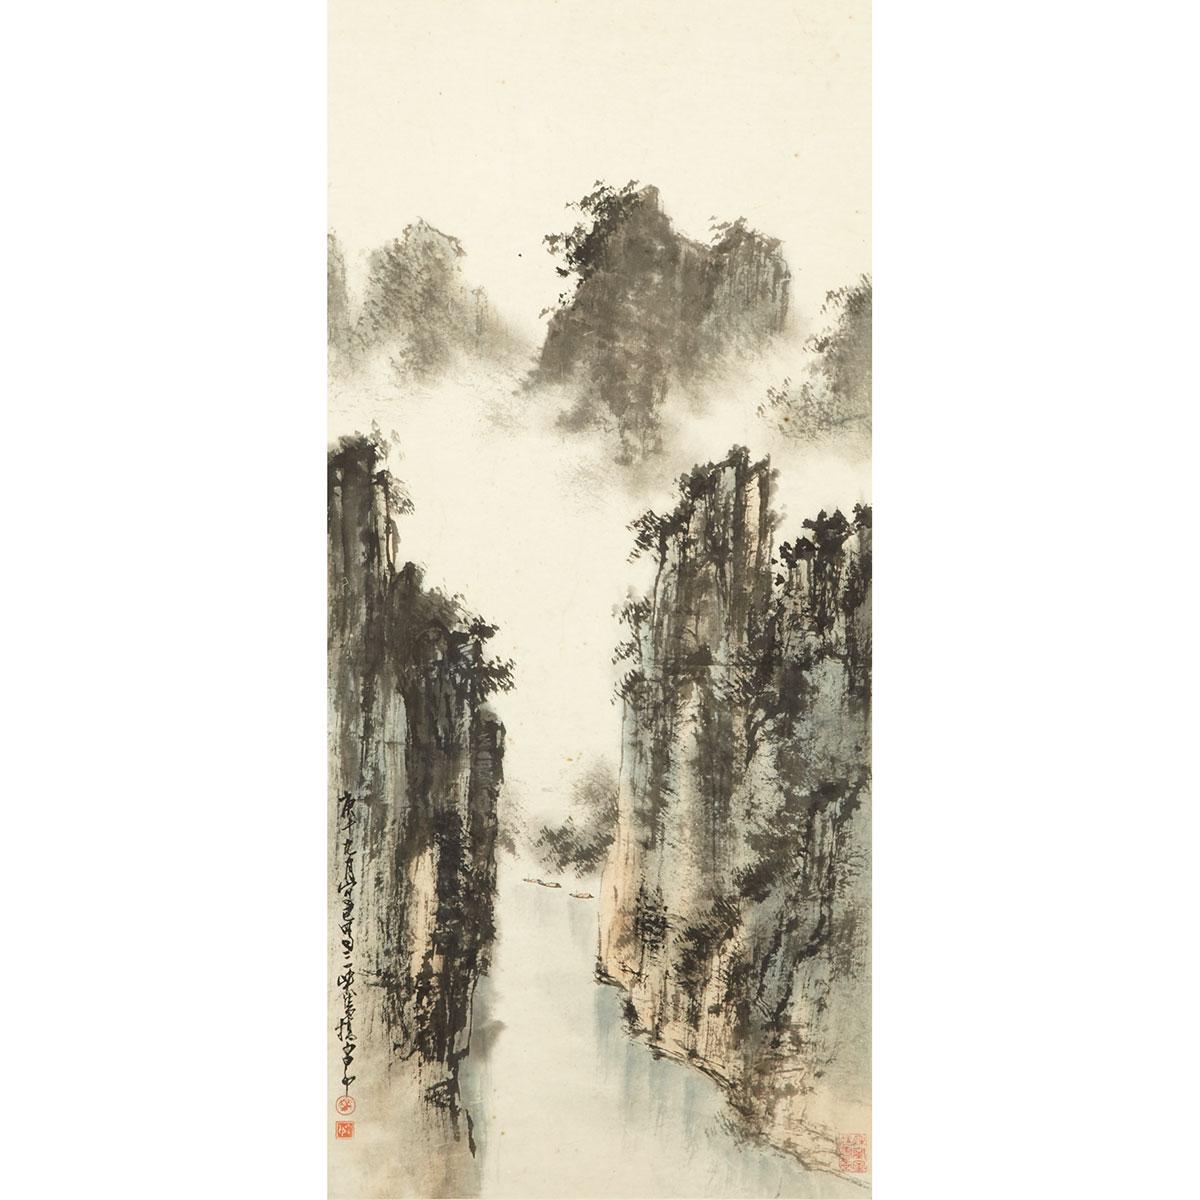 Attributed to Zhao Shao’Ang (1905-1998)